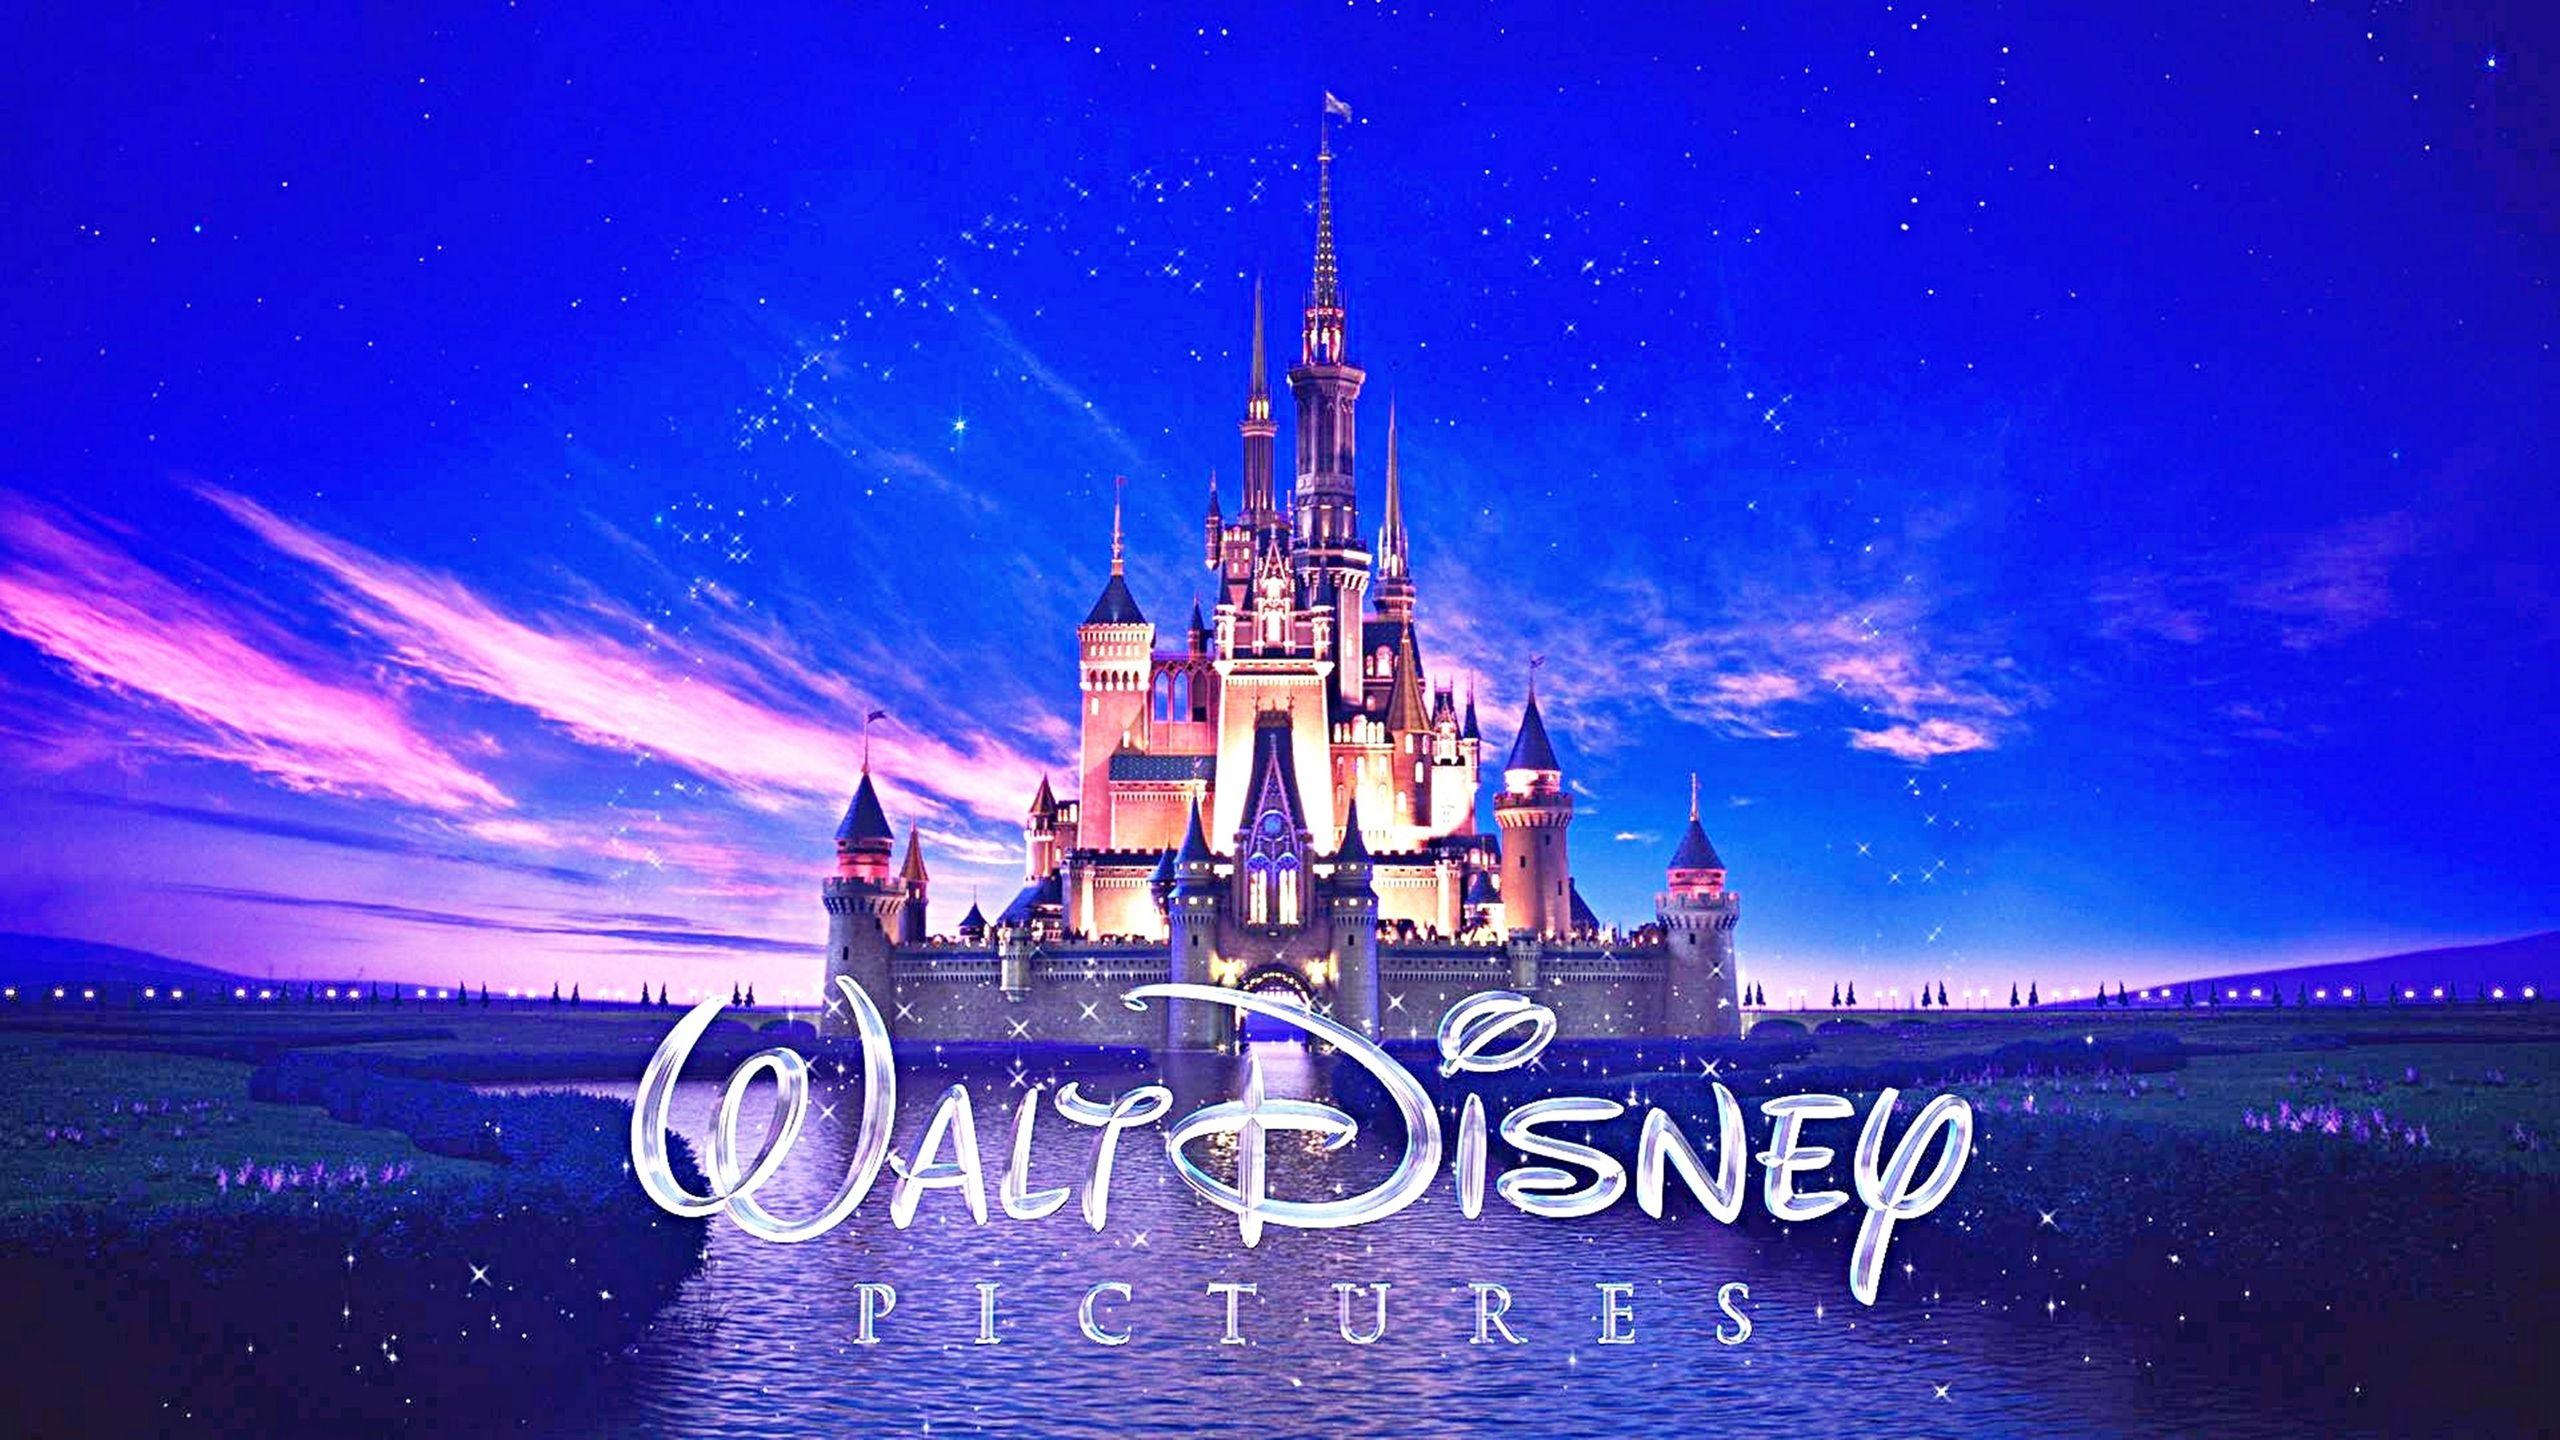 Disney Films Logo - Disney and Pixar Animated Films to be Released From 2016 to 2018